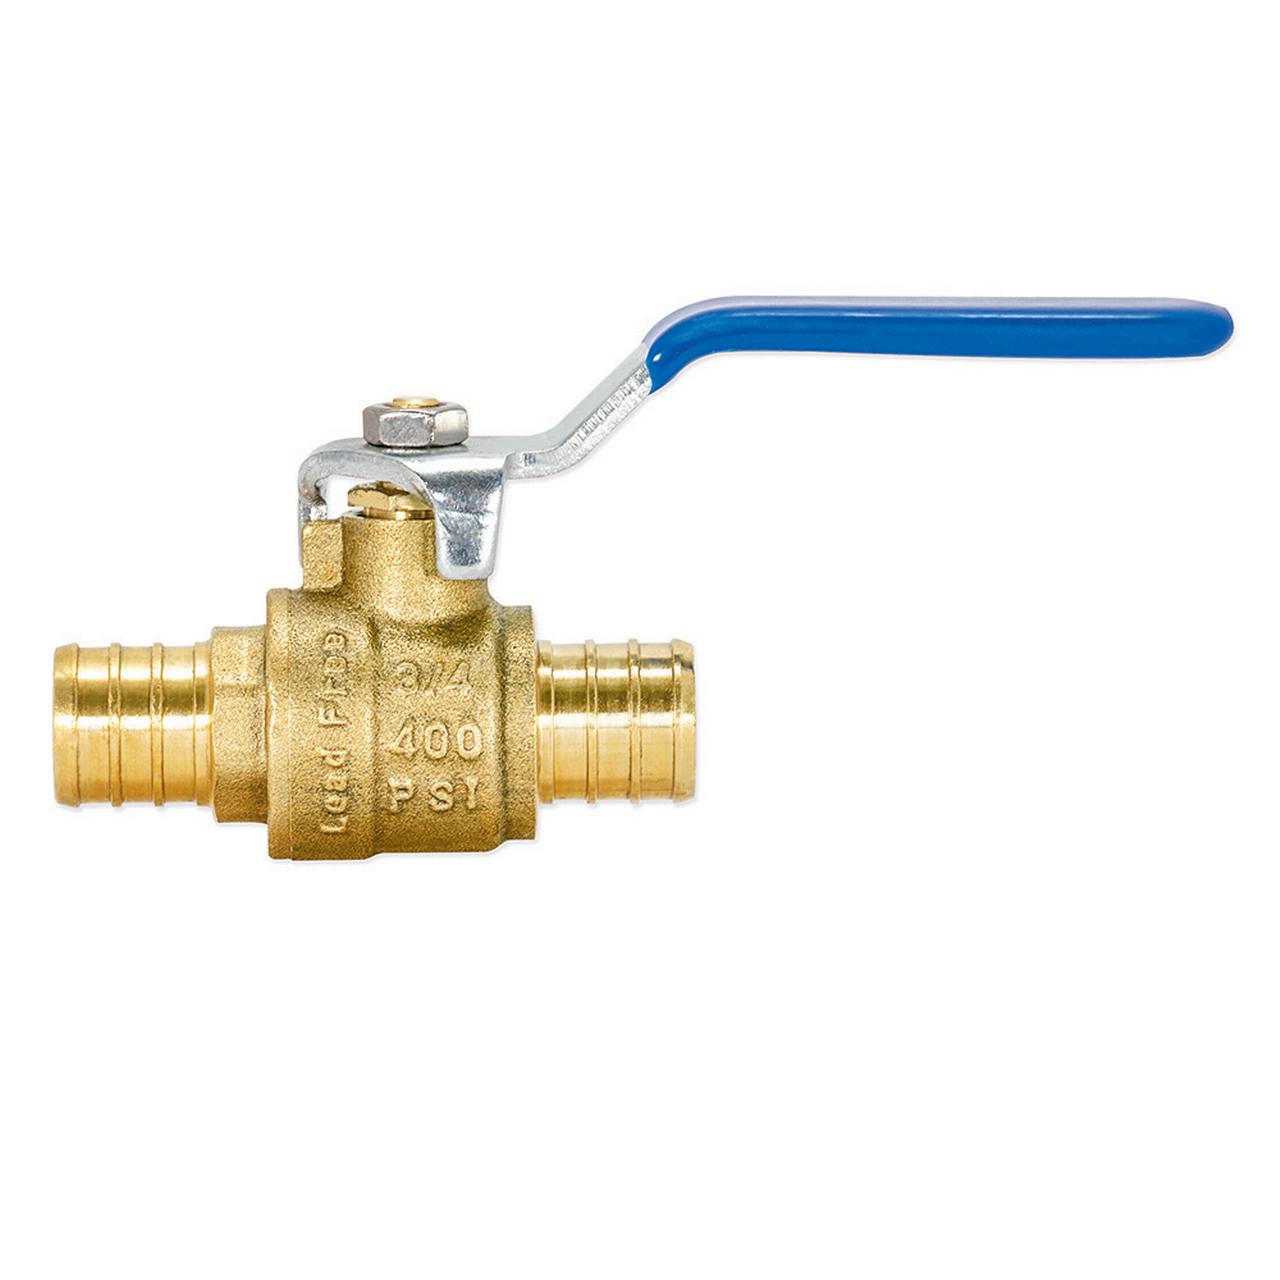 Eastman 20094LF Heavy-Duty PEX Ball Valve with Handle, 3/4 inch, Brass - image 3 of 6